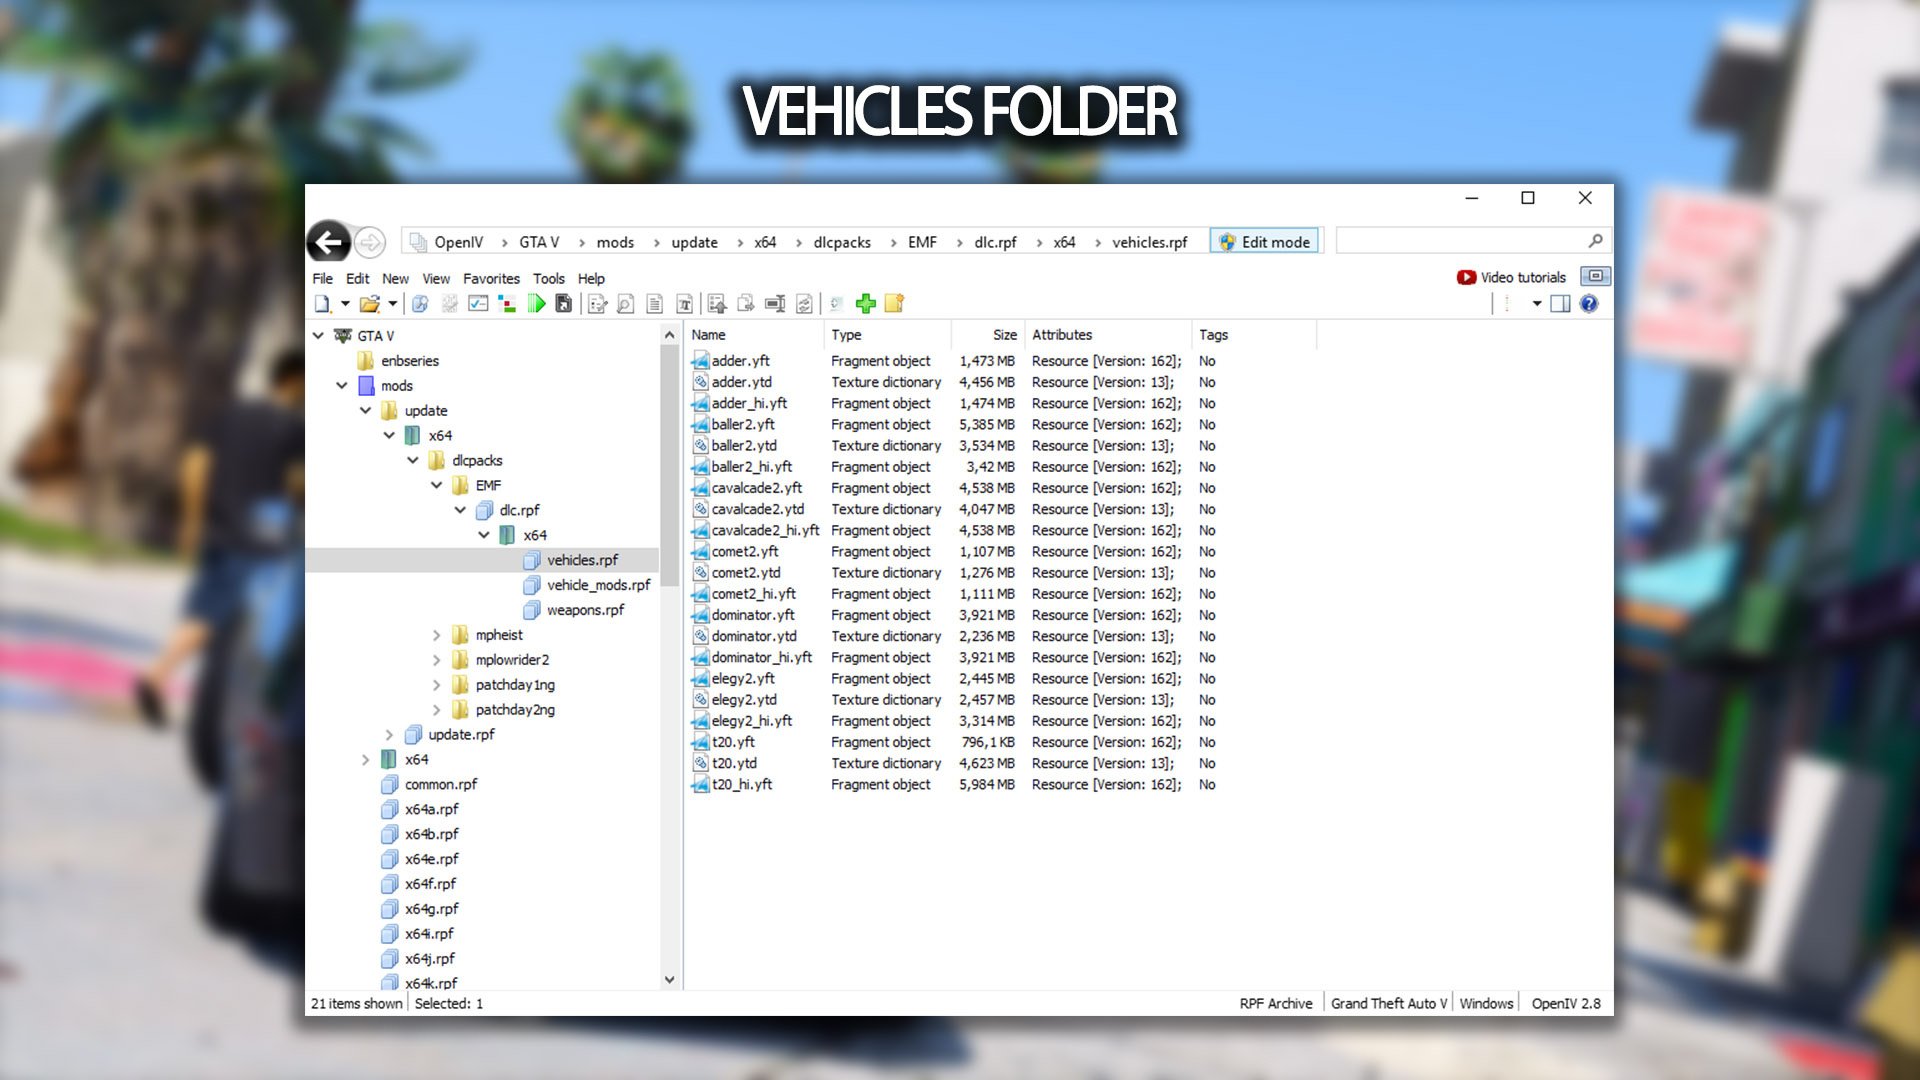 How to DOWNLOAD GTA 5 ON PC (EASY METHOD) 